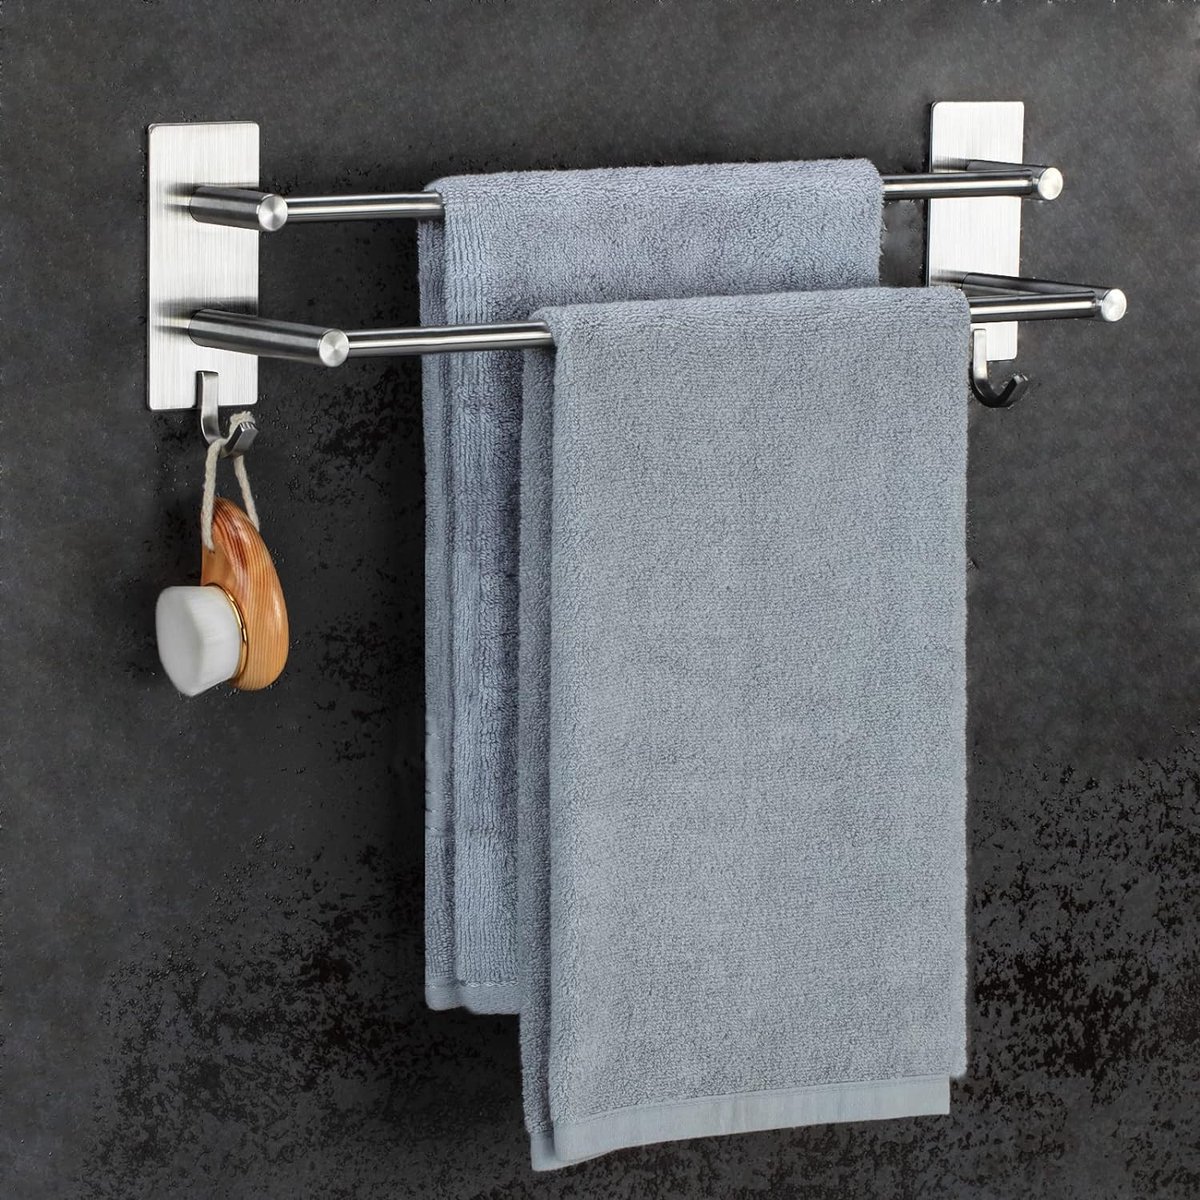 Towel Rail No Drilling Bathroom Towel Rail Brushed Stainless Steel Self-Adhesive Bath Towel Holder Double with 2 Towel Hooks Wall Mounted for Bathroom Kitchen